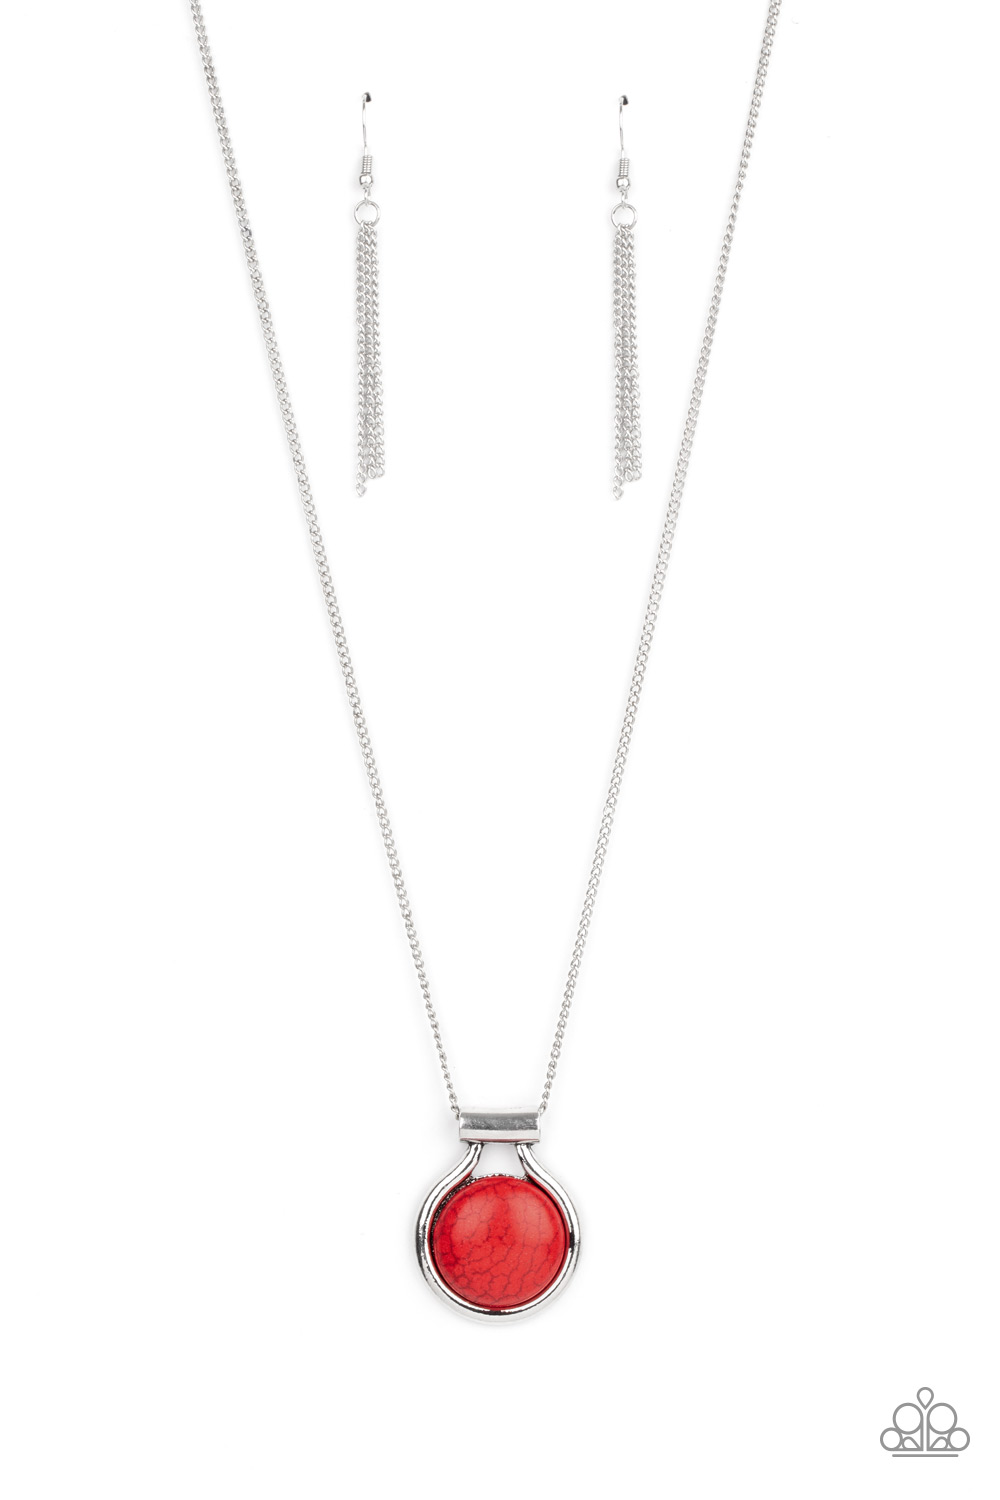 Necklace - Patagonian Paradise - Red